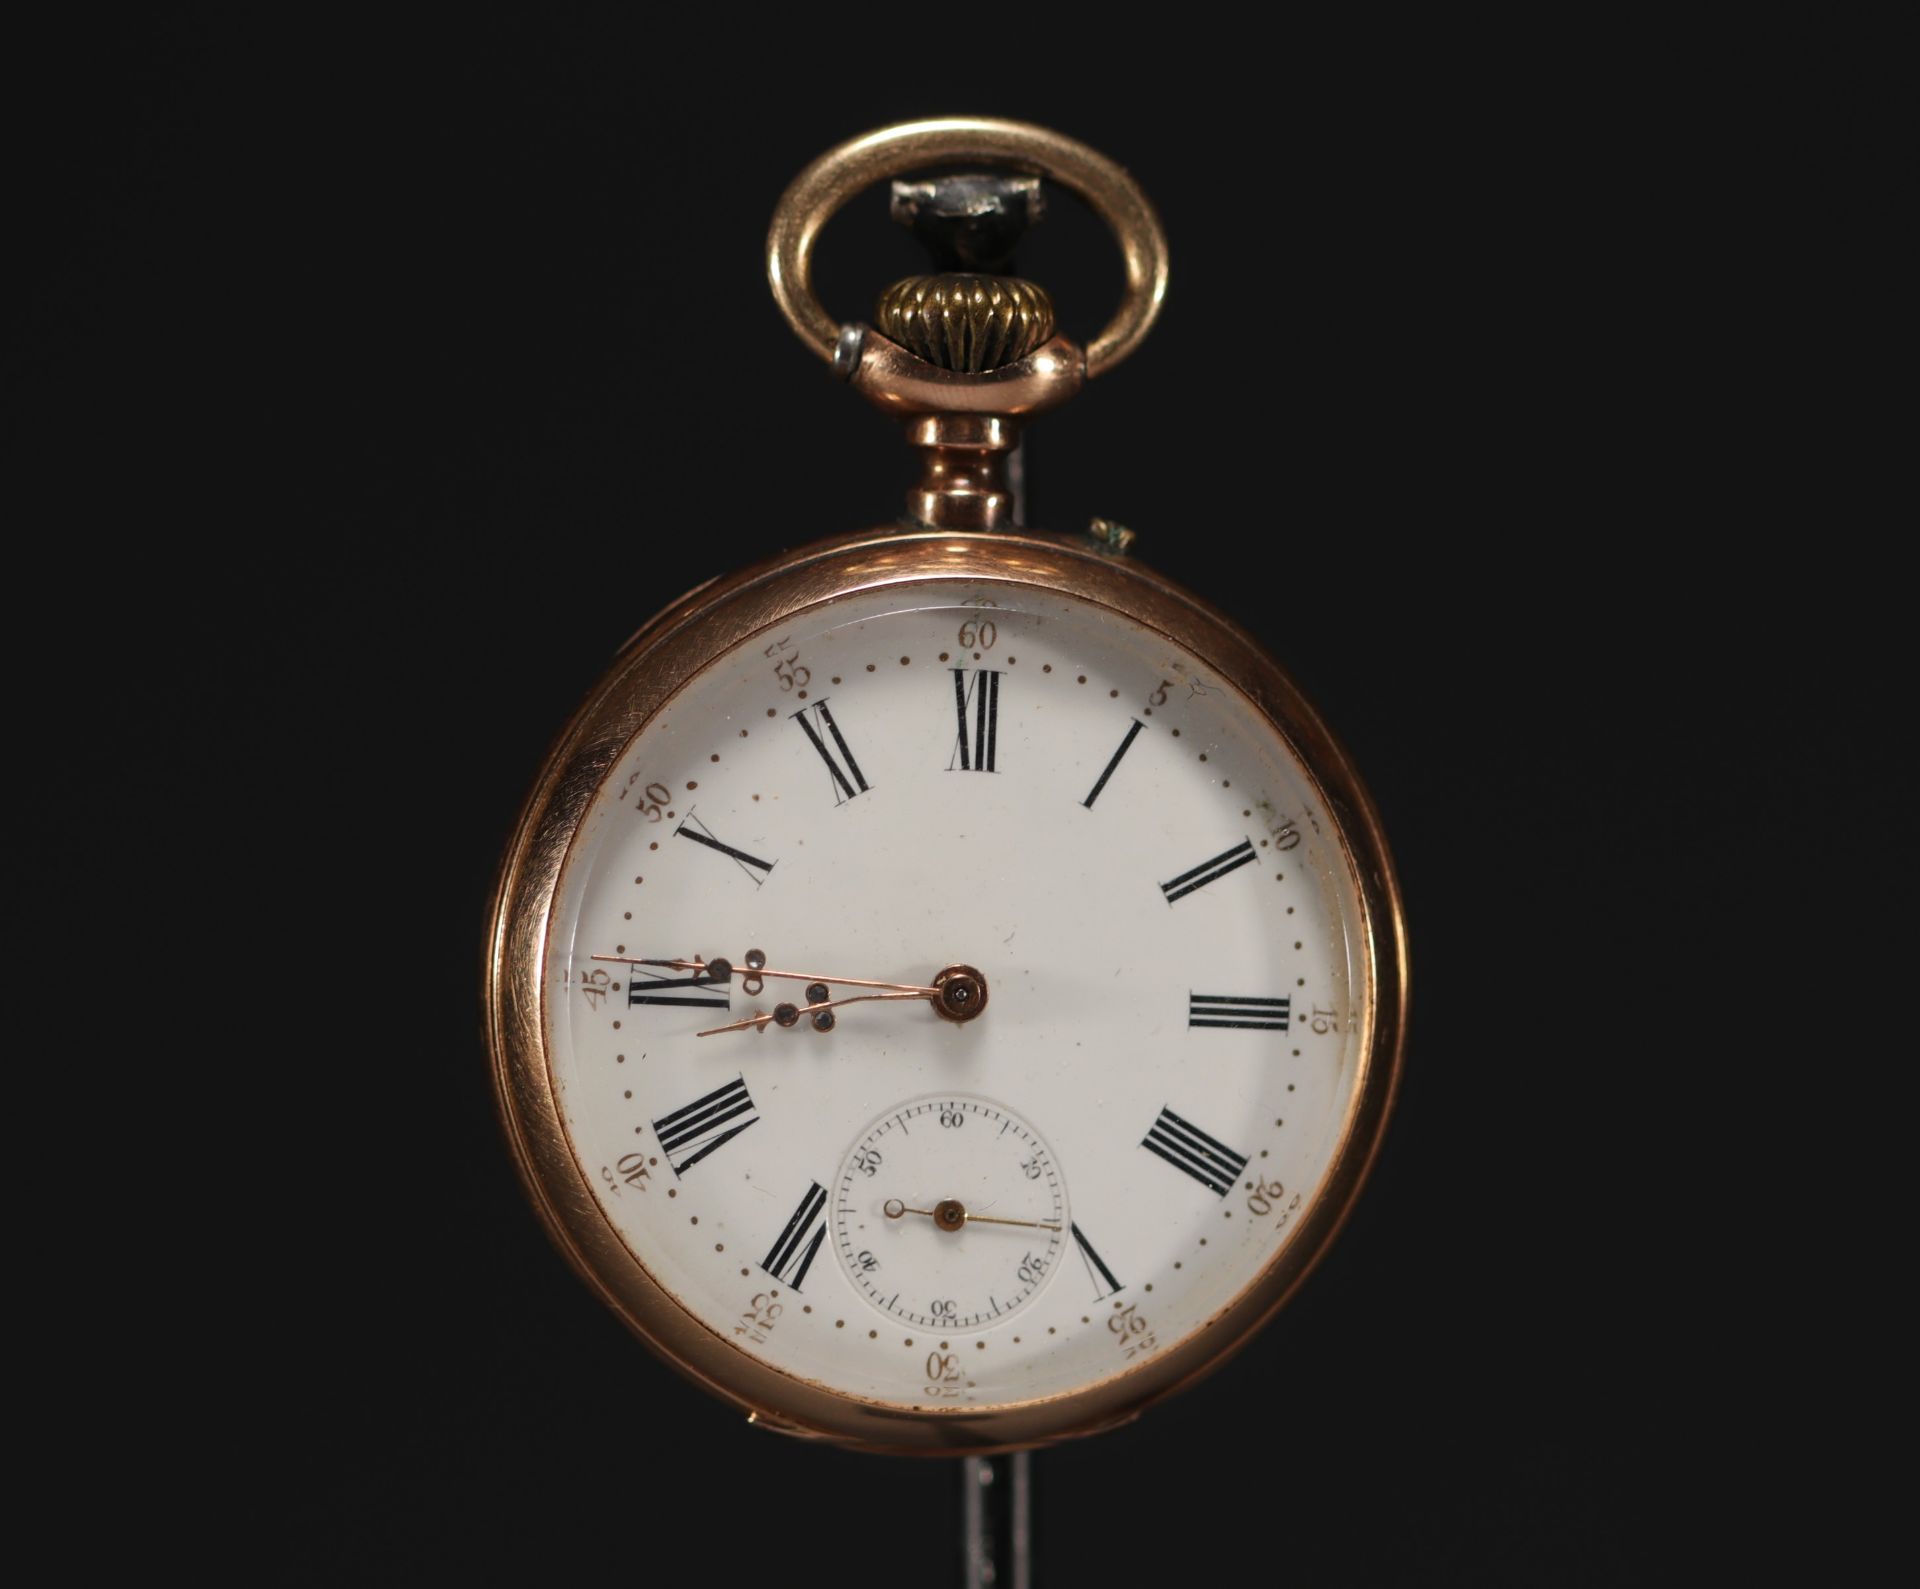 18k gold "Pateck Geneve Cylindre 10 Rubis" pocket watch, total weight 69.9 g.